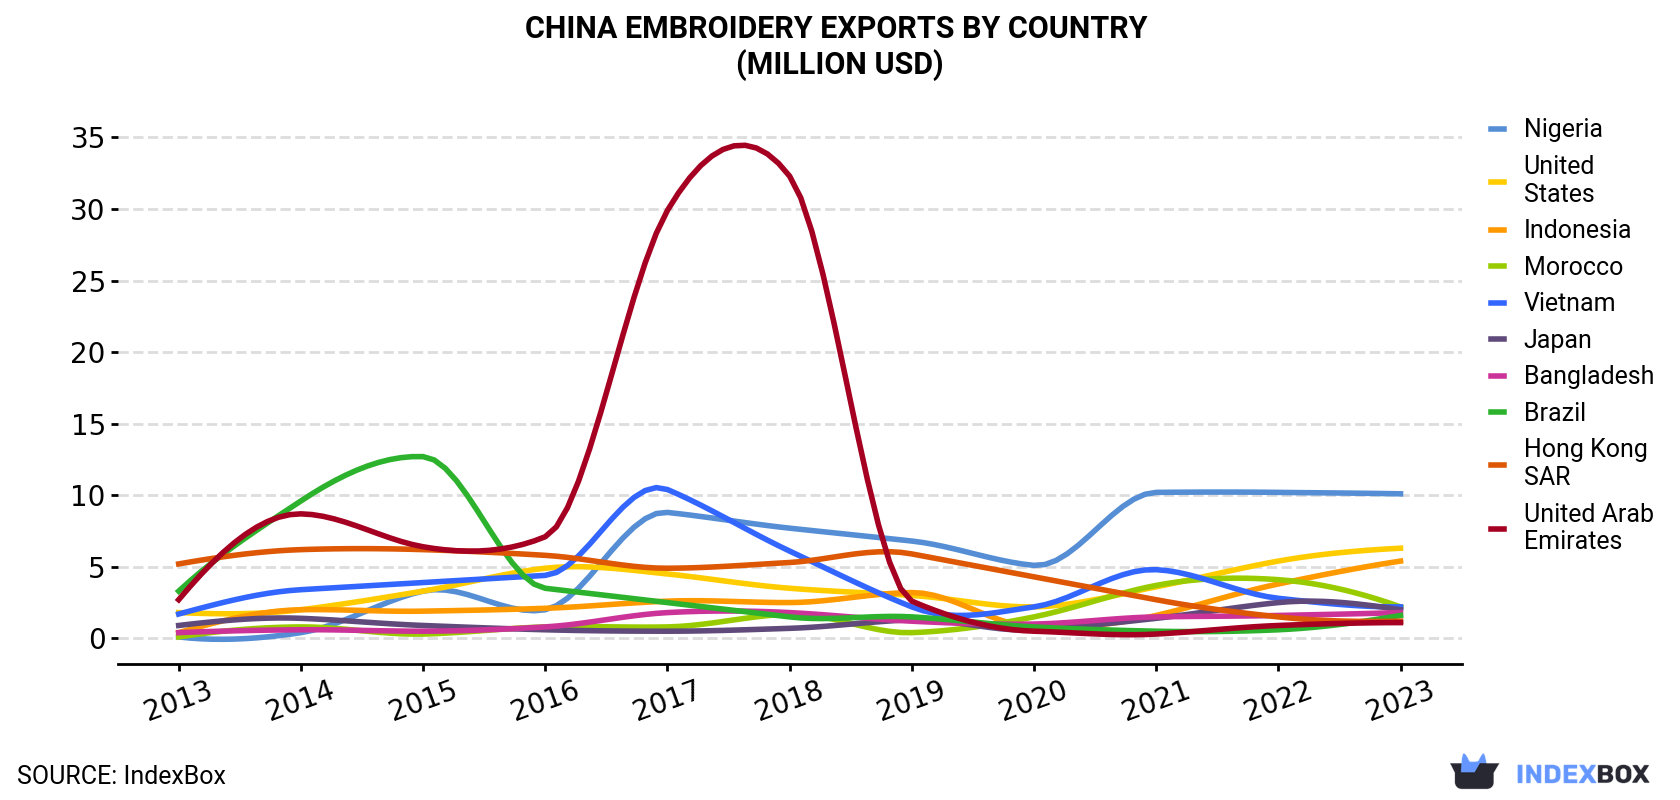 China Embroidery Exports By Country (Million USD)